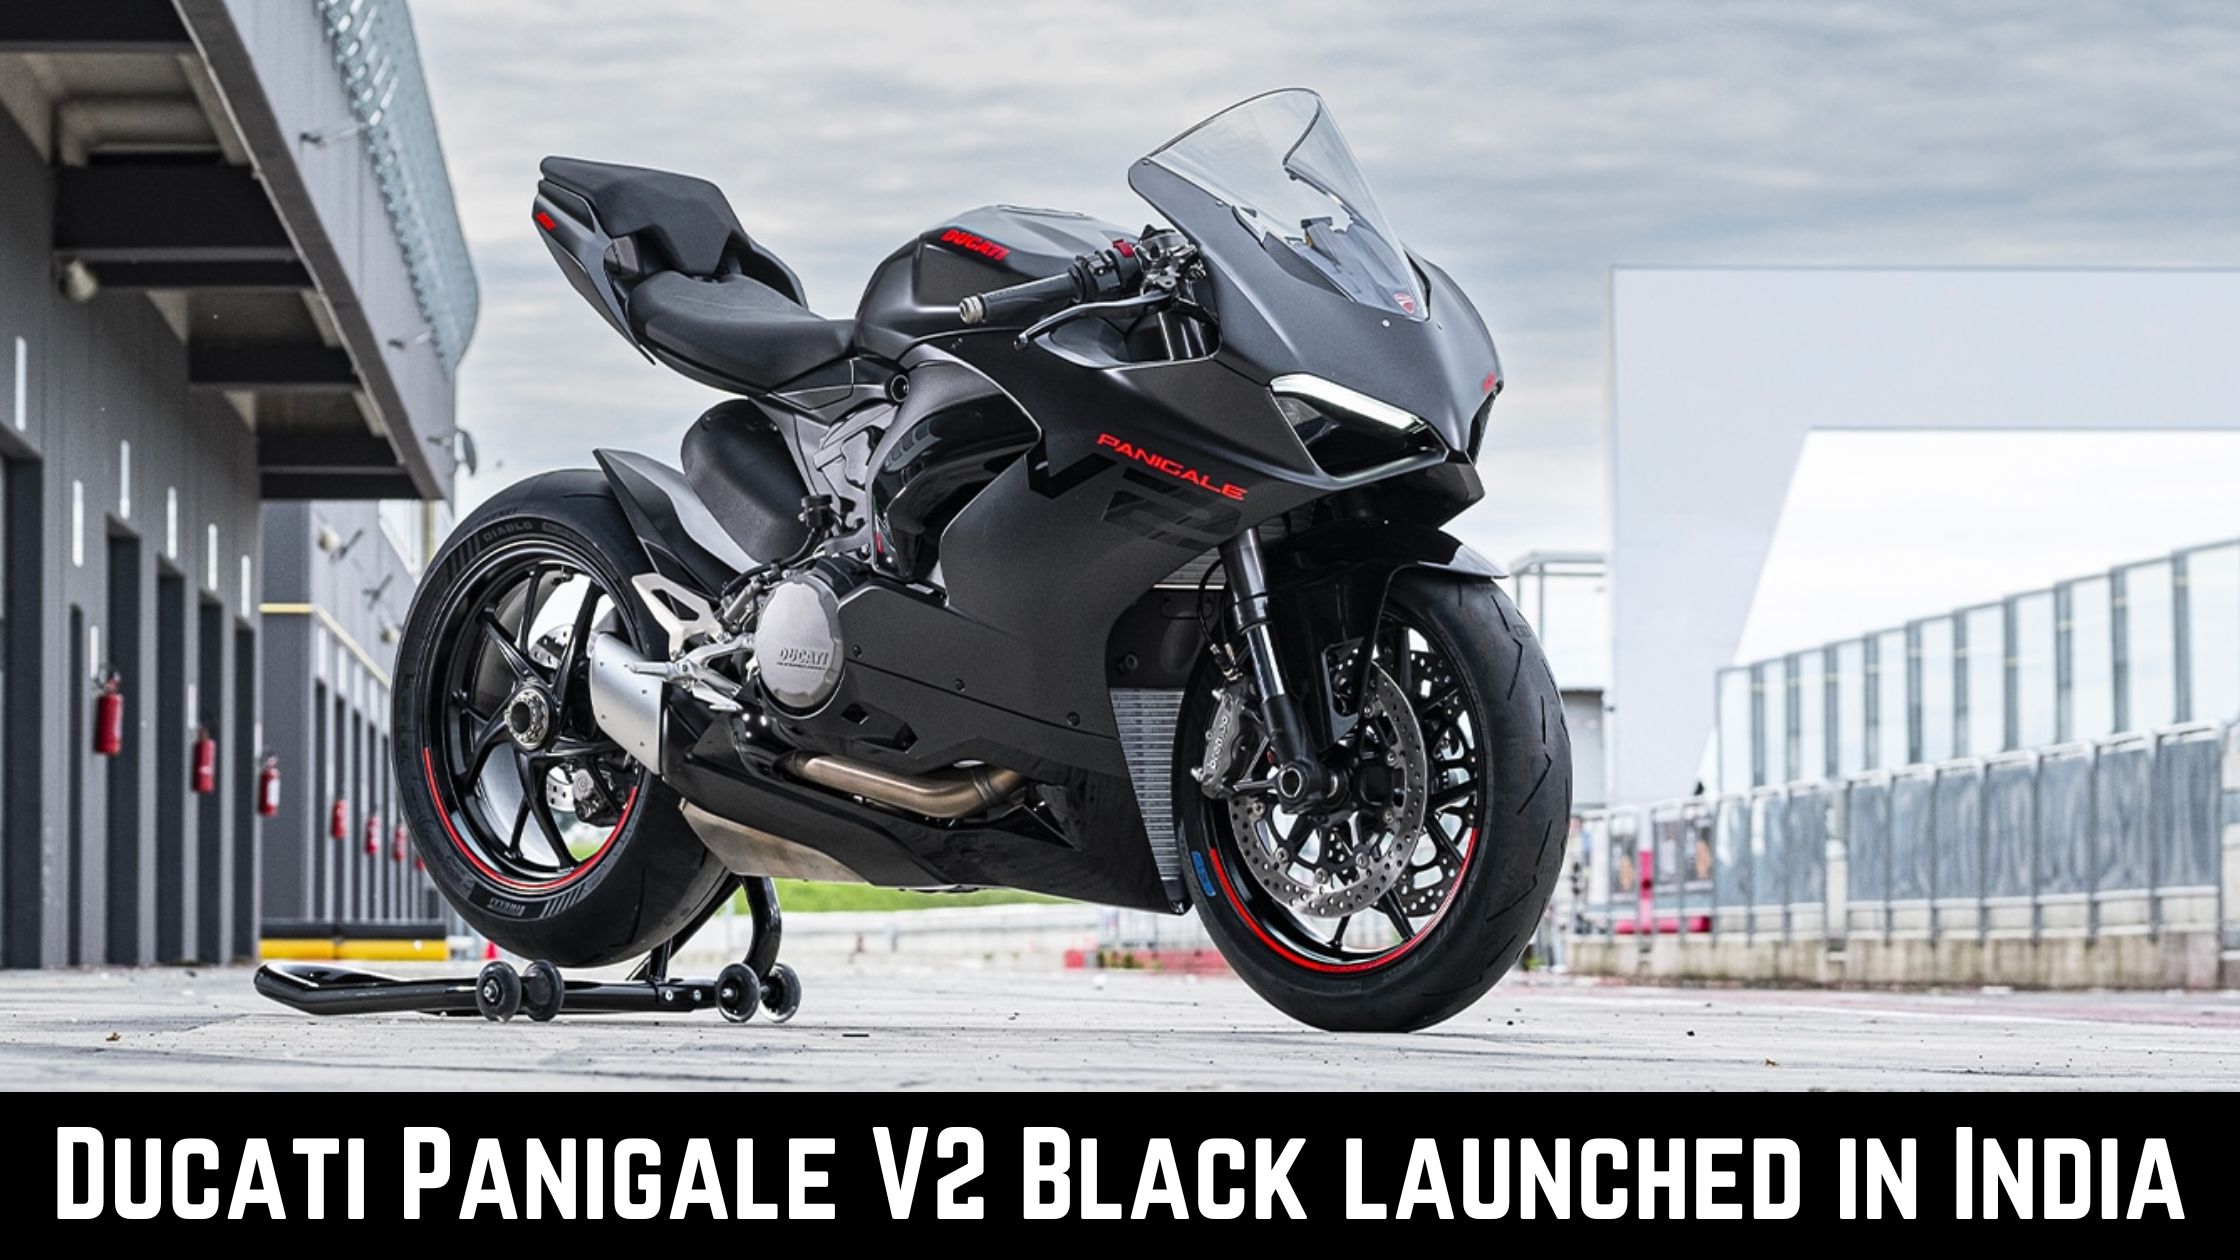 Ducati Panigale V2 Black launched in India